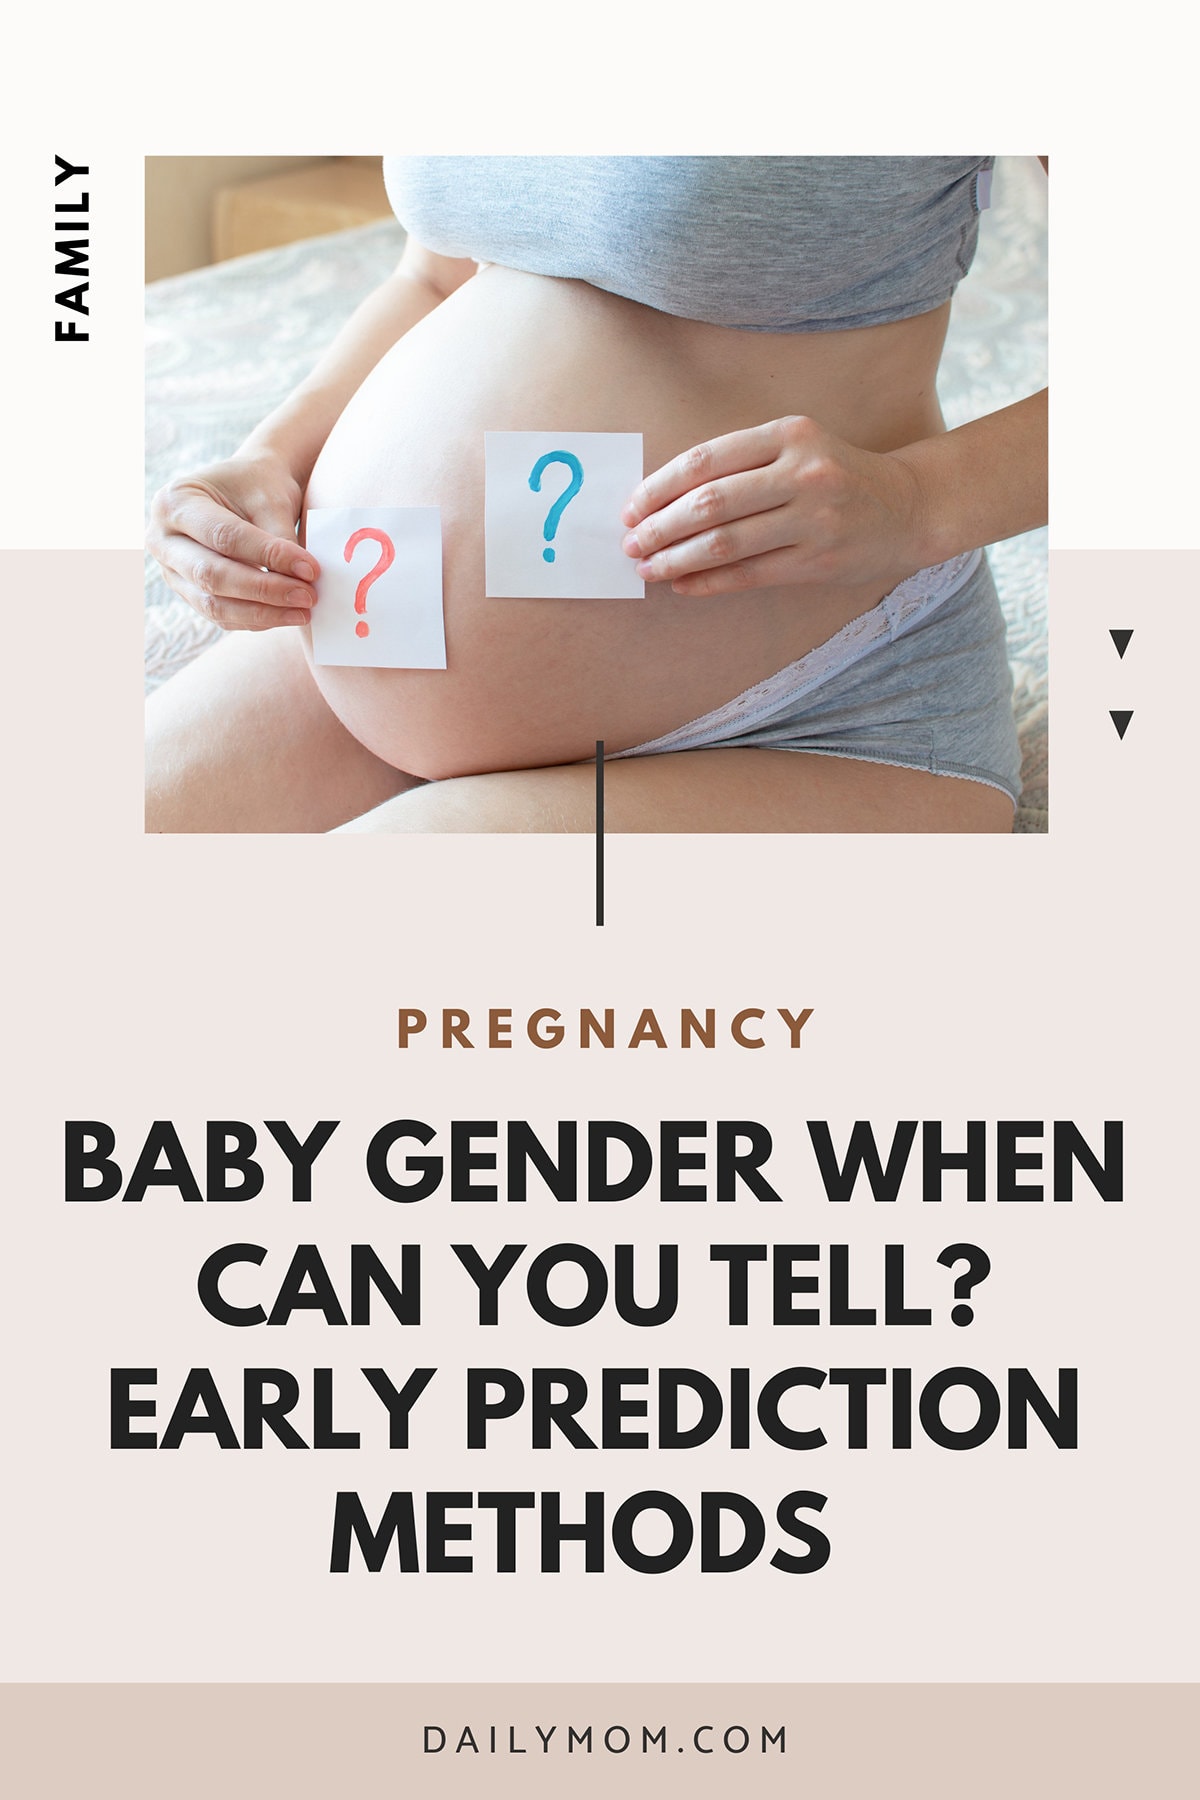 Daily-Mom-Parent-Portal-Baby-Gender-When-Can-You-Tell?